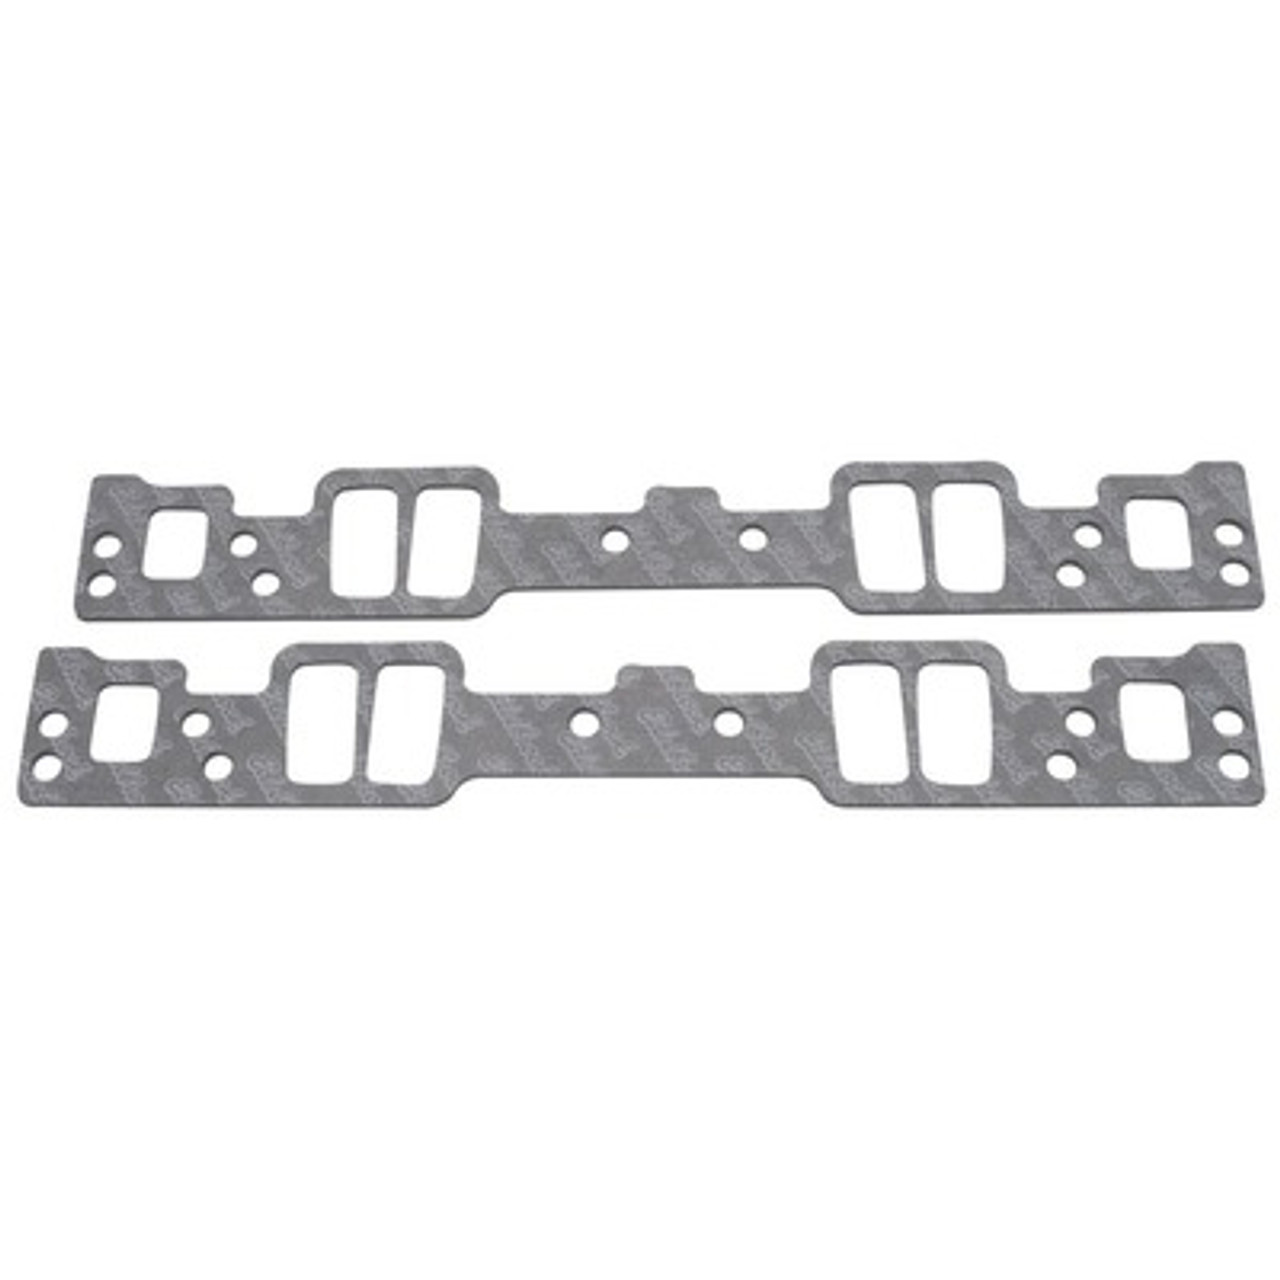 EDE7235, Intake Manifold Gasket, 0.120 in Thick, 1.080 x 2.110 in Rectangular Port, Composite, E-Tech Heads, Small Block Chevy, Pair